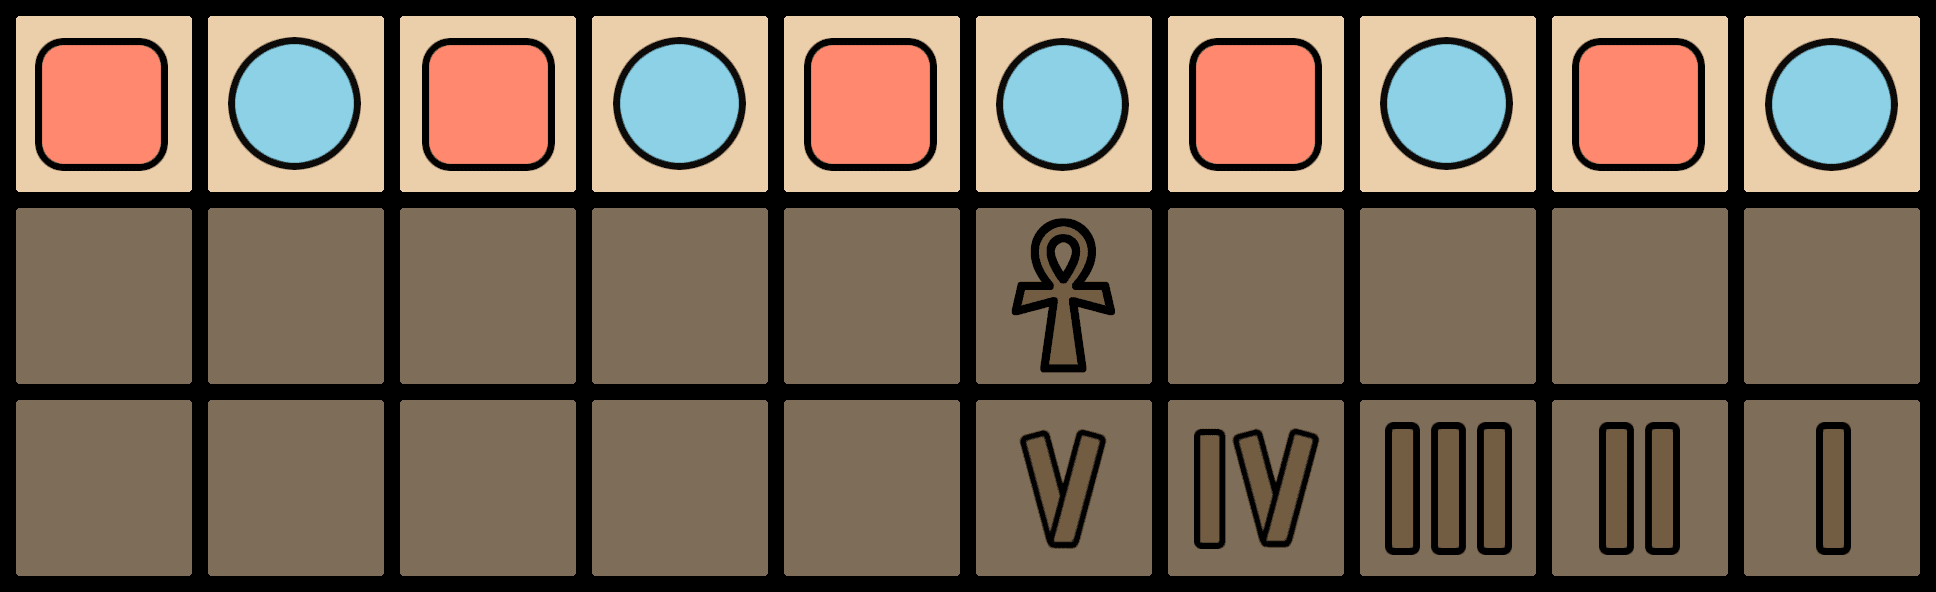 A Senet board with the starting positions of pieces highlighted. Red squares are used for one player's pieces, and blue circles for the other